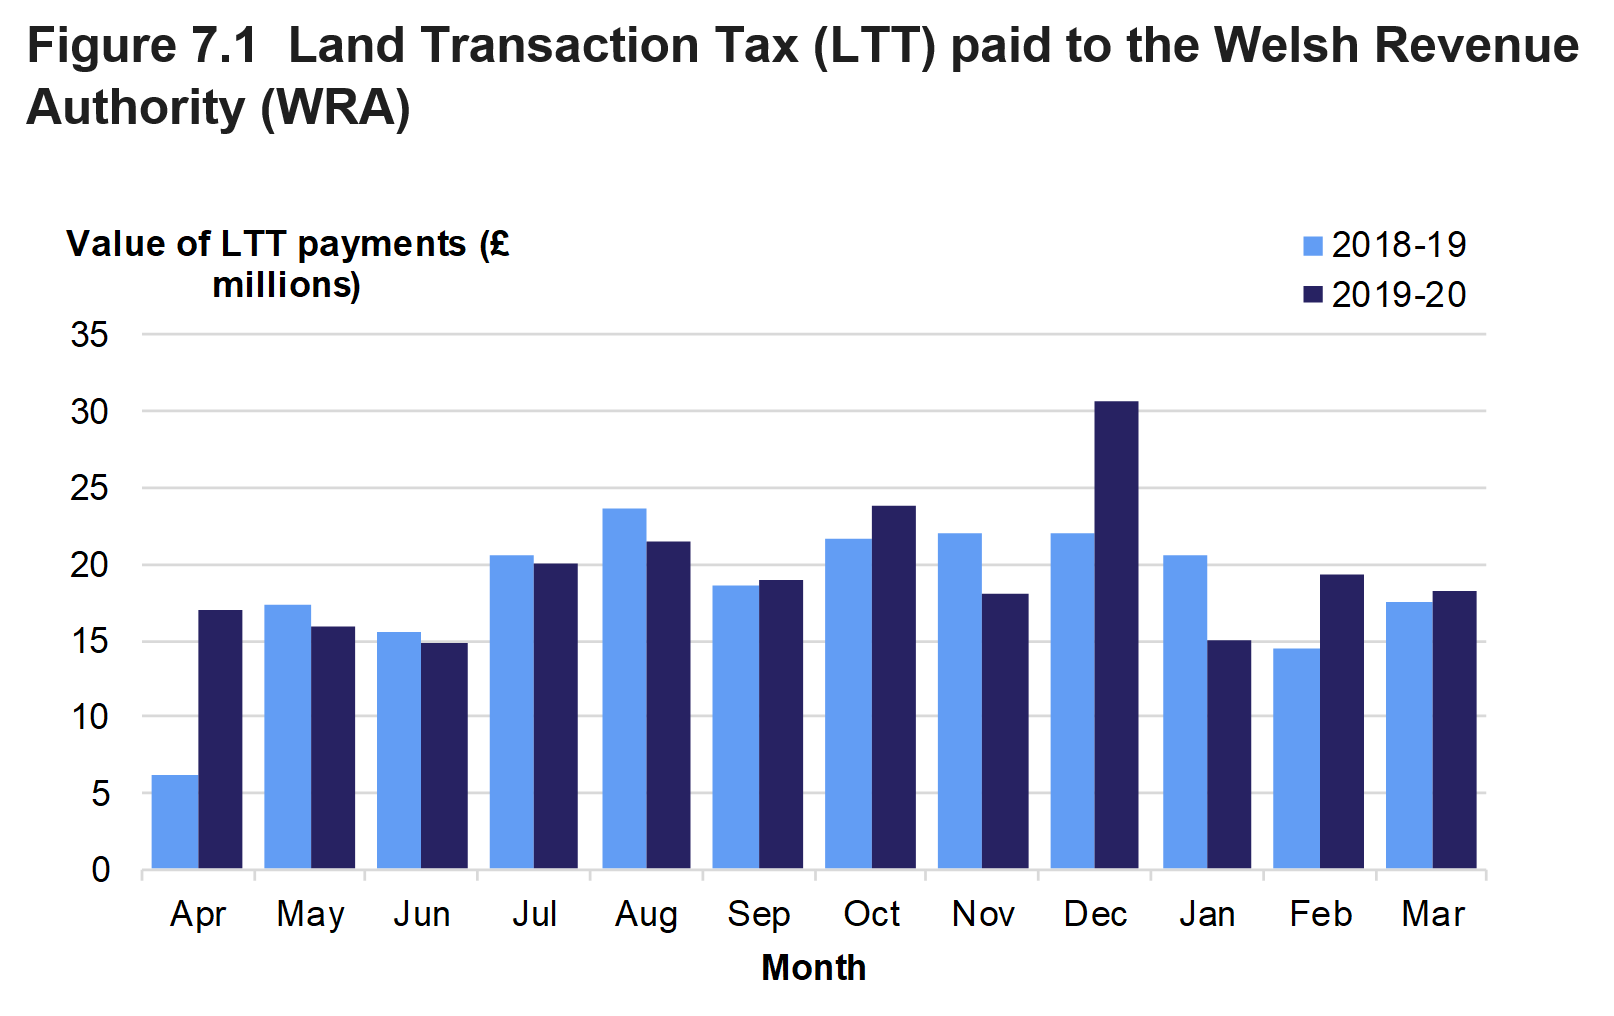 Figure 7.1 shows the monthly amounts of Land Transaction Tax paid to the Welsh Revenue Authority, for April 2018 to March 2020.